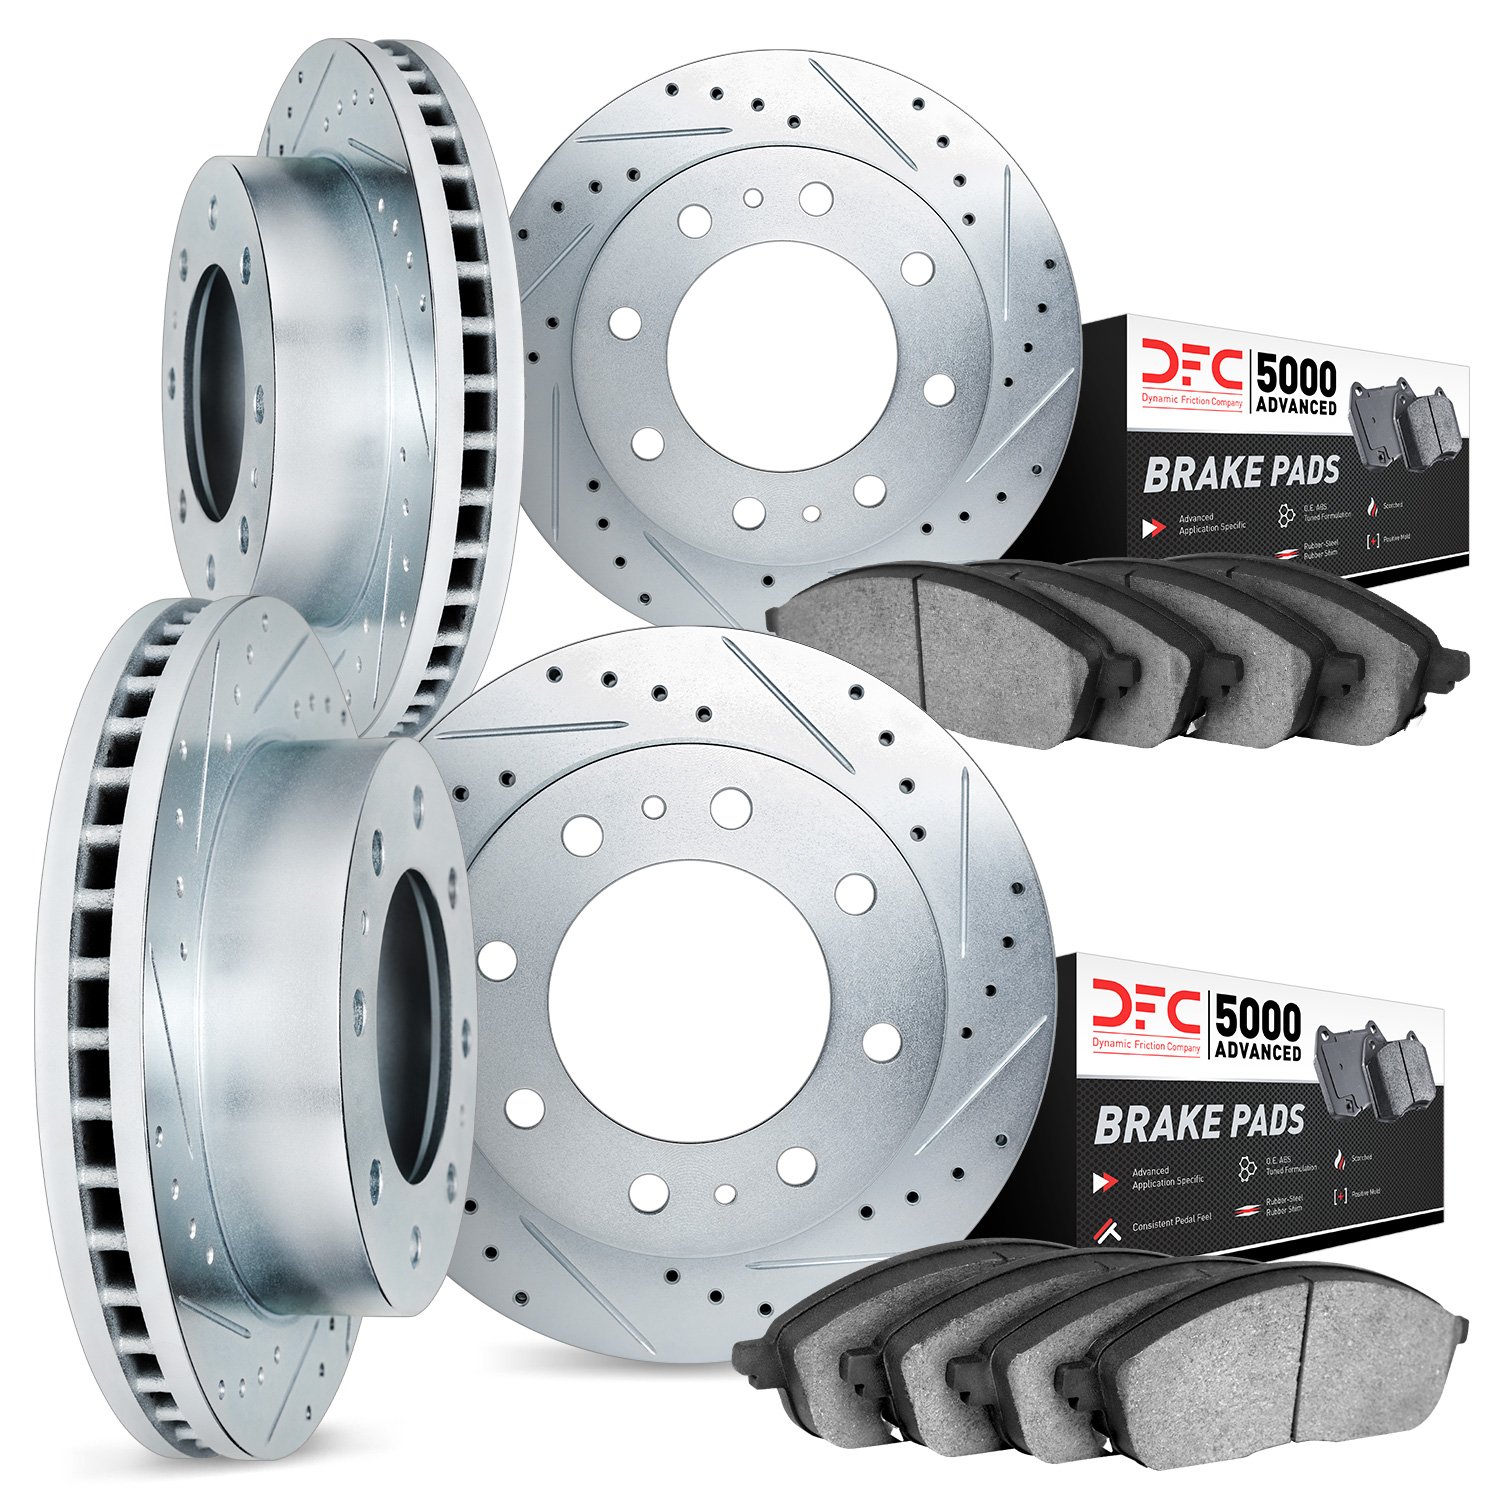 7504-54372 Drilled/Slotted Brake Rotors w/5000 Advanced Brake Pads Kit [Silver], 2006-2010 Ford/Lincoln/Mercury/Mazda, Position: